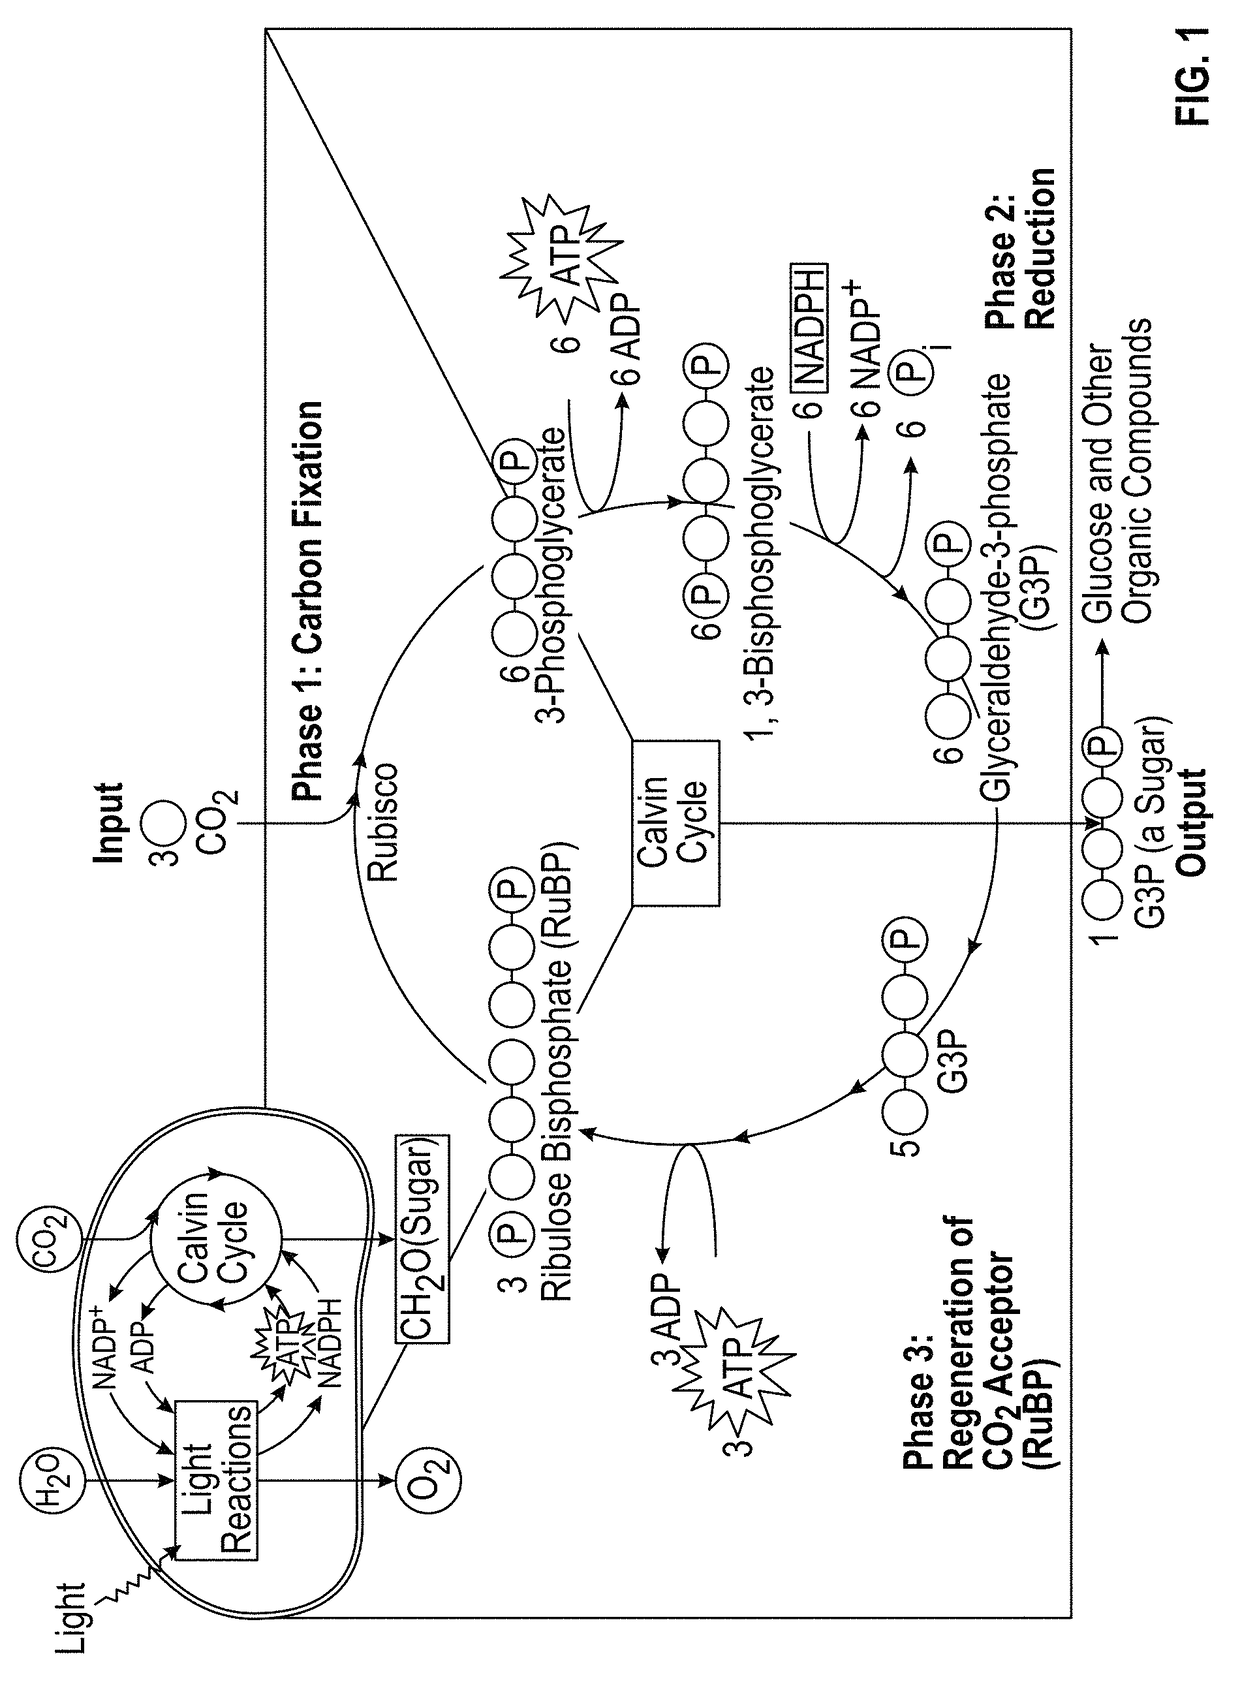 Transgenic plants with engineered redox sensitive modulation of photosynthetic antenna complex pigments and methods for making the same